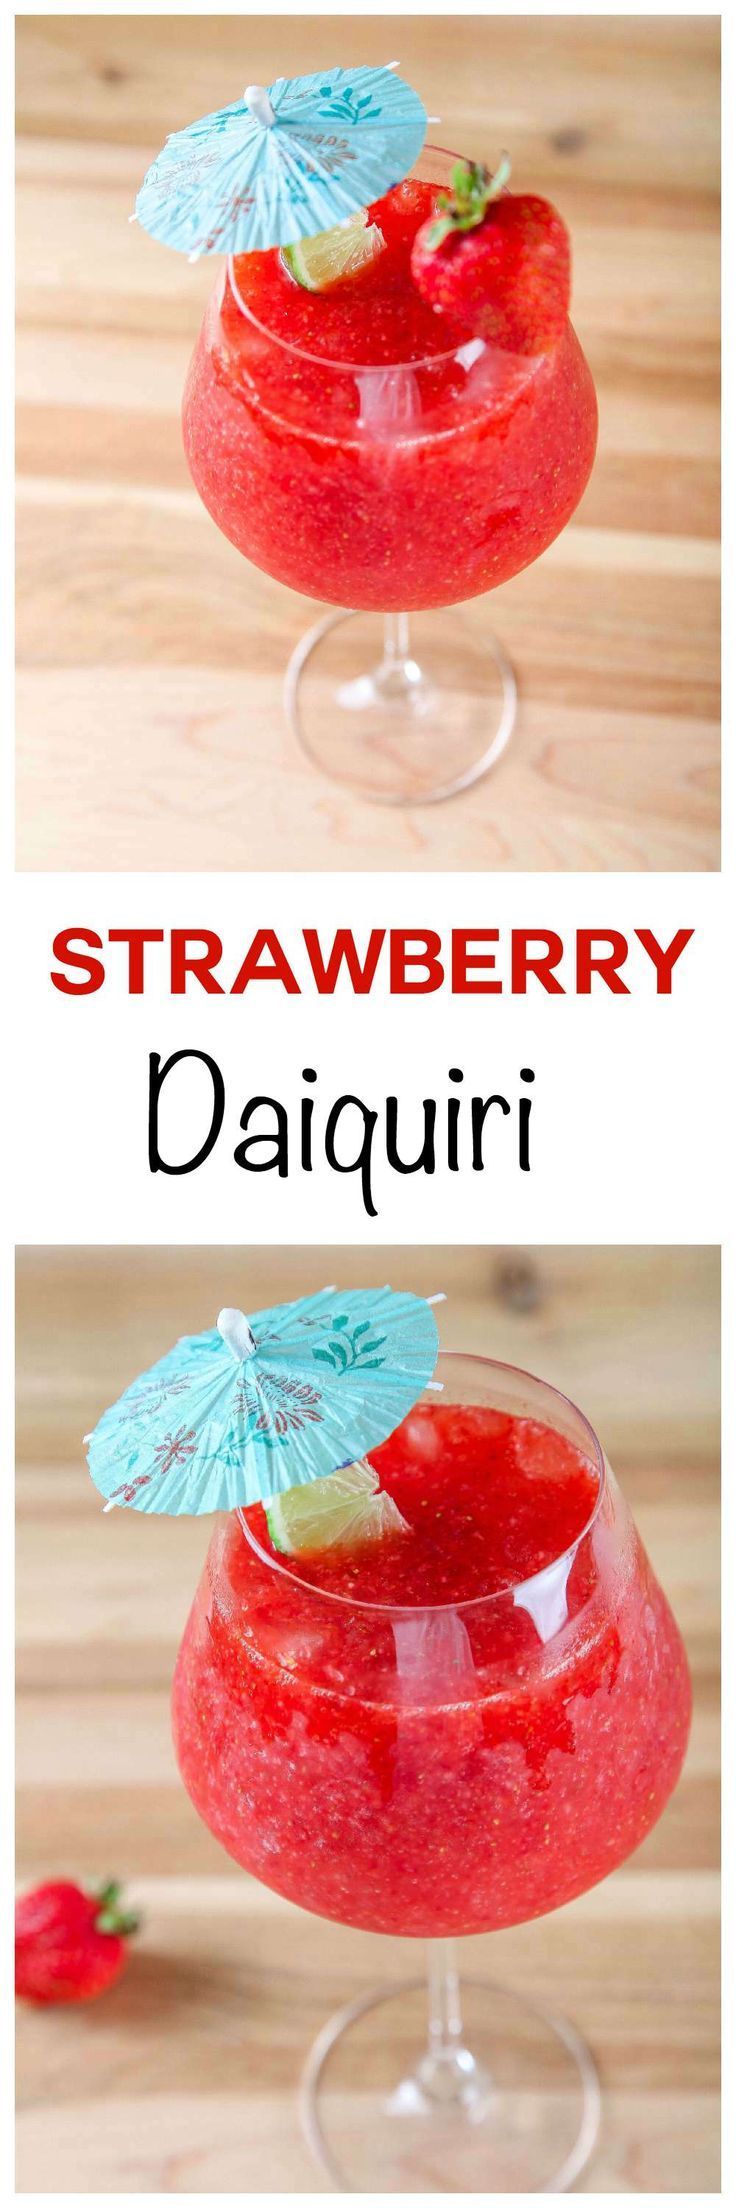 Easy Strawberry Daiquiri: Frosty, sweet, and refreshing cocktail that couldn’t be easier to make. Requires